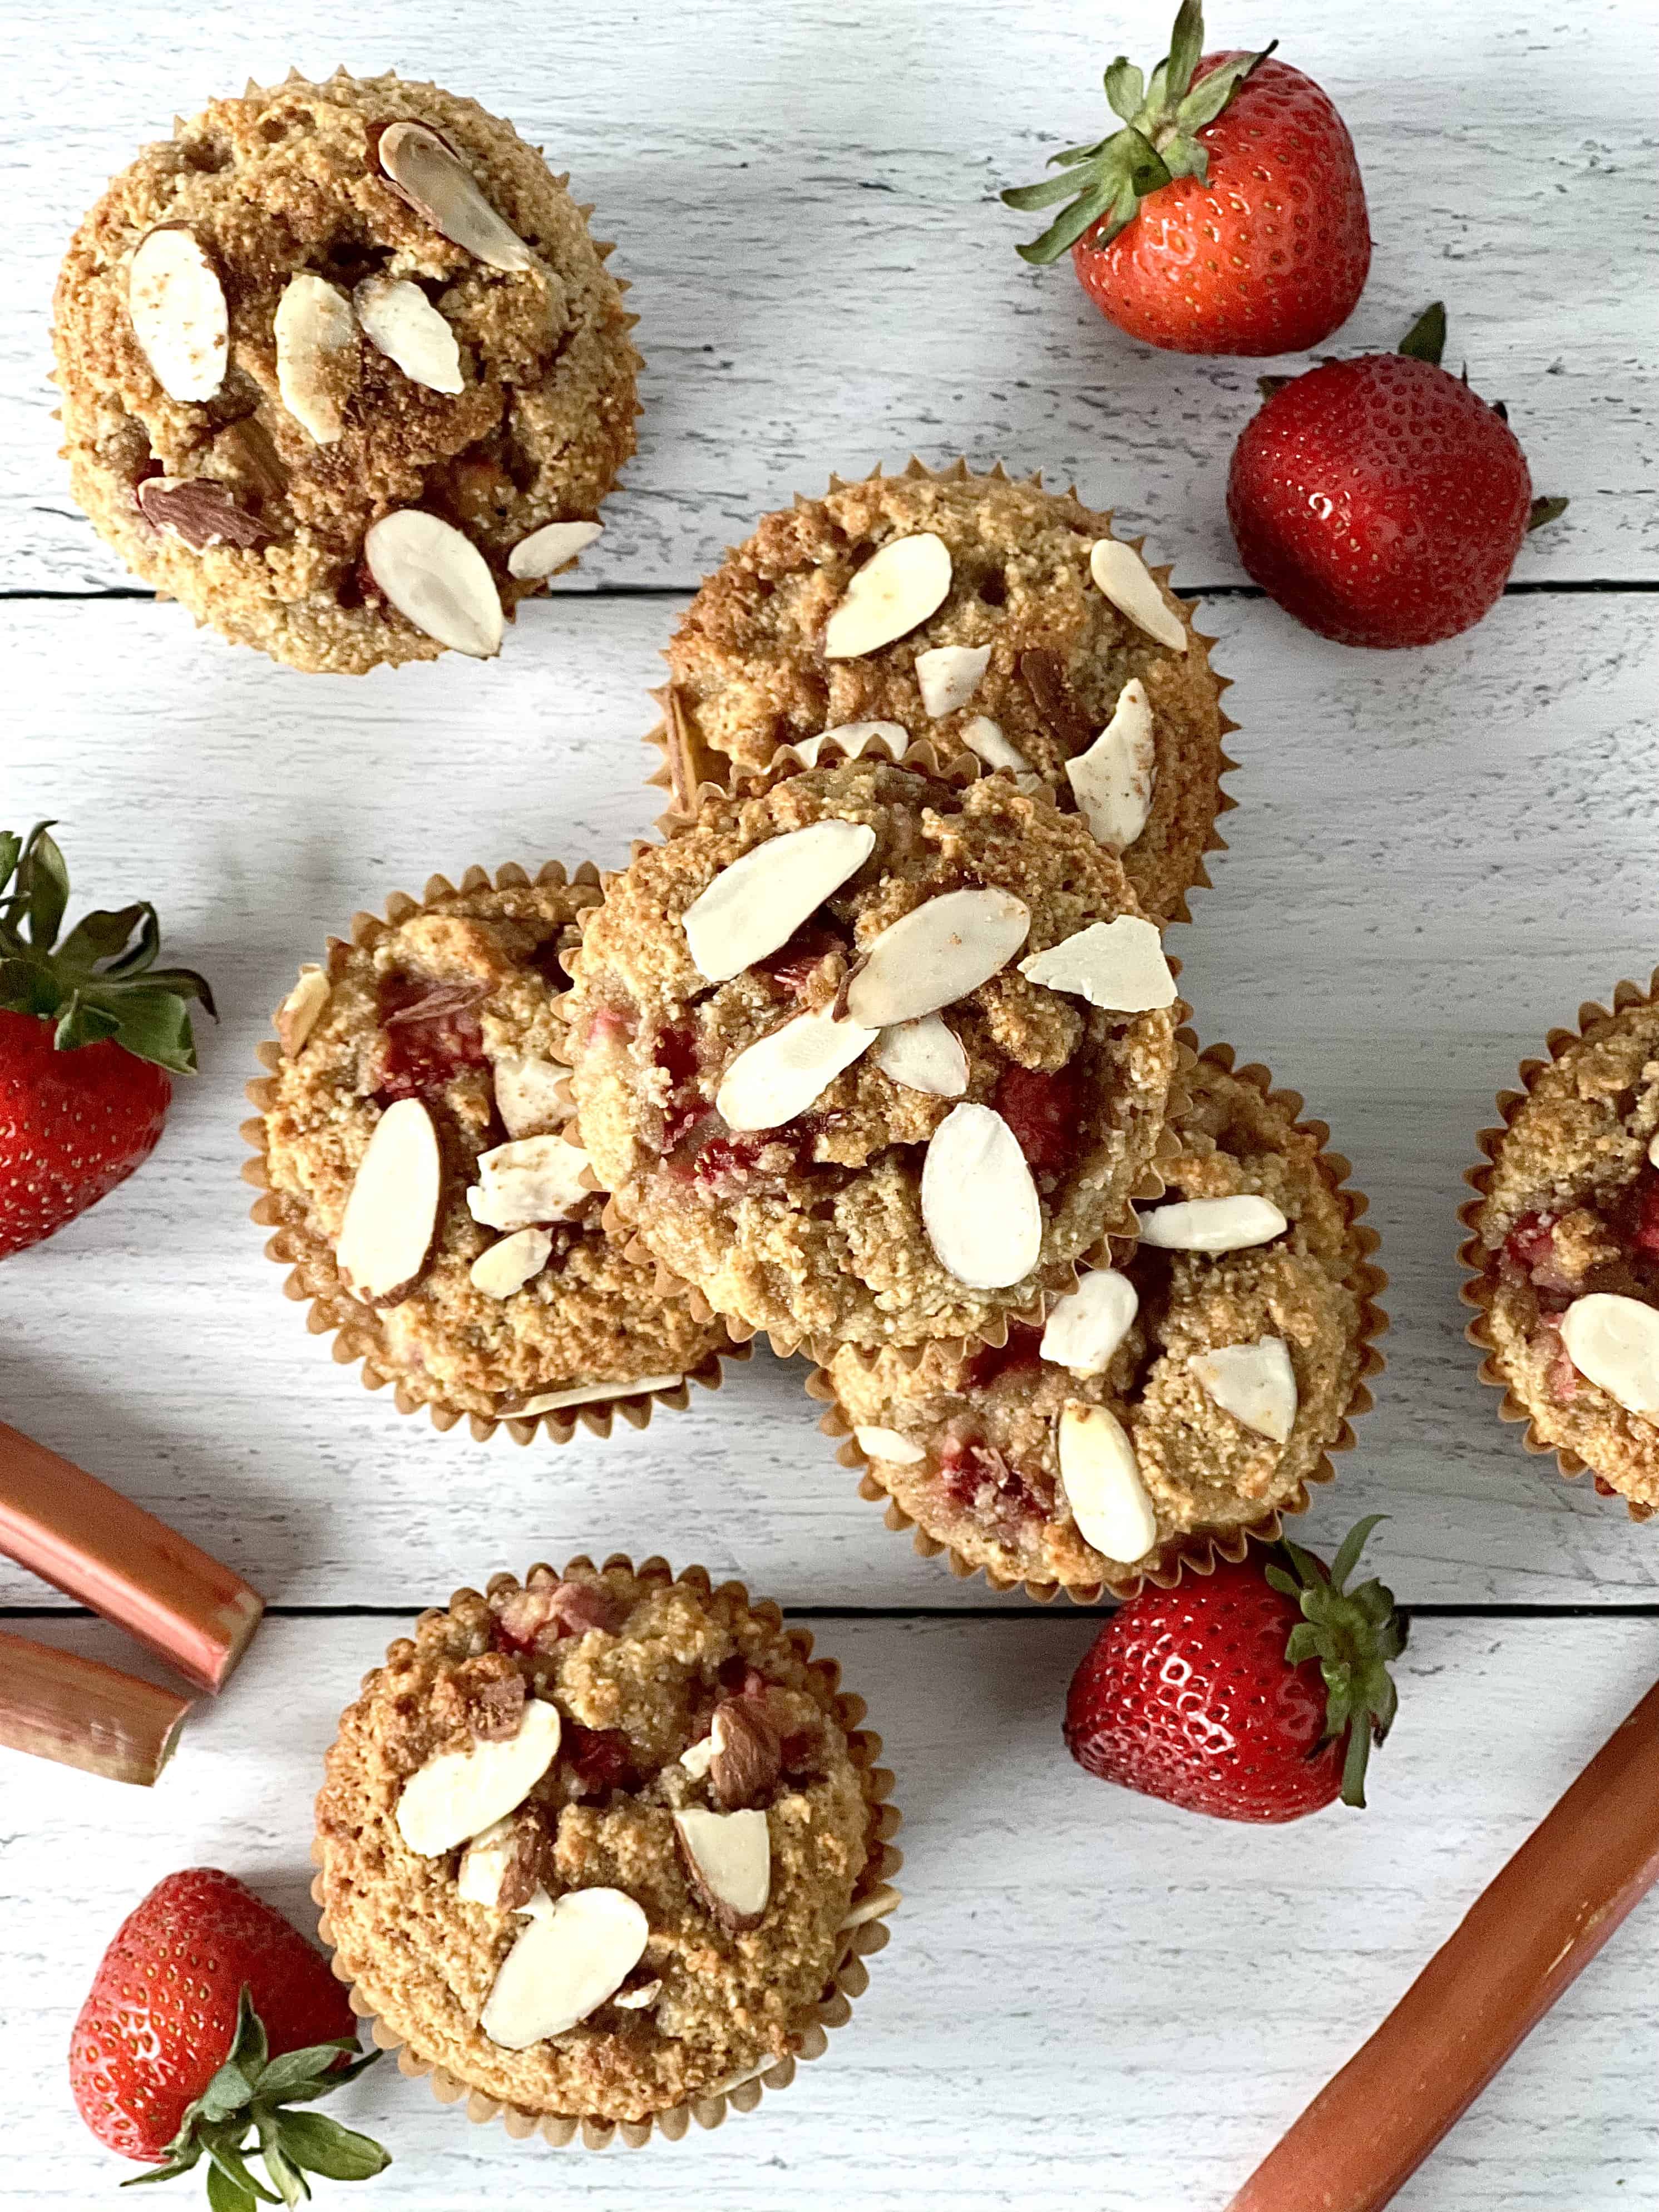 grain-free muffins with strawberries and rhubarb, plus sliced almonds on top, on a white wooden table with rhubarb stalks and strawberries